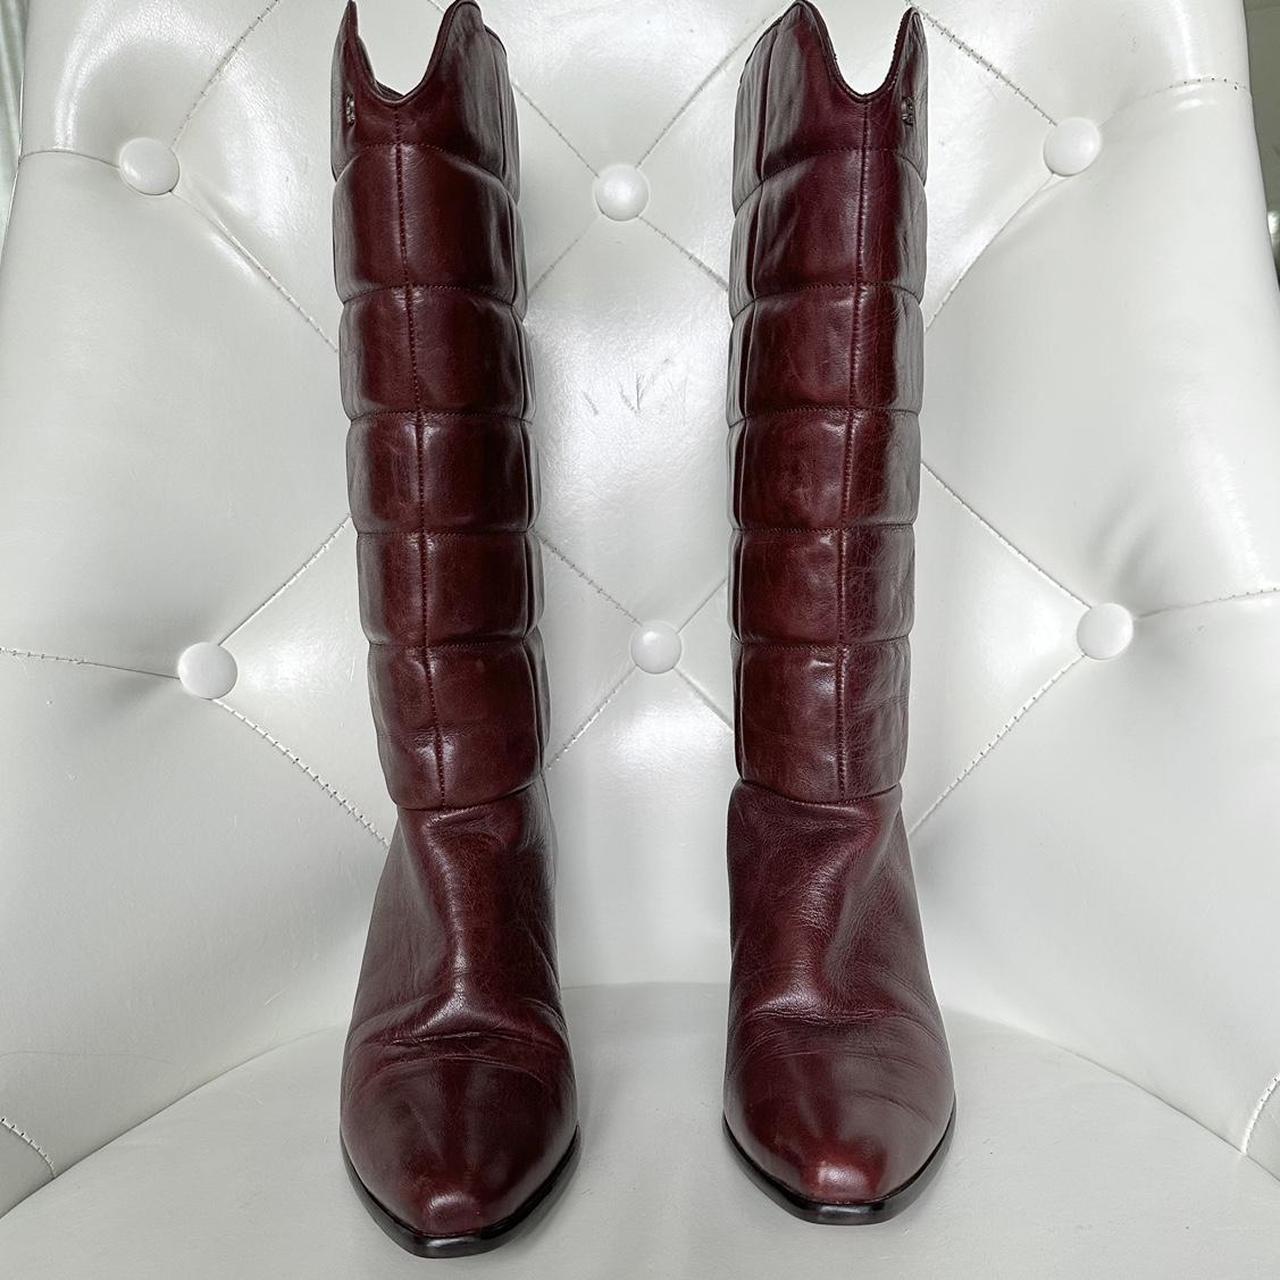 Aigner Women's Burgundy and Red Boots